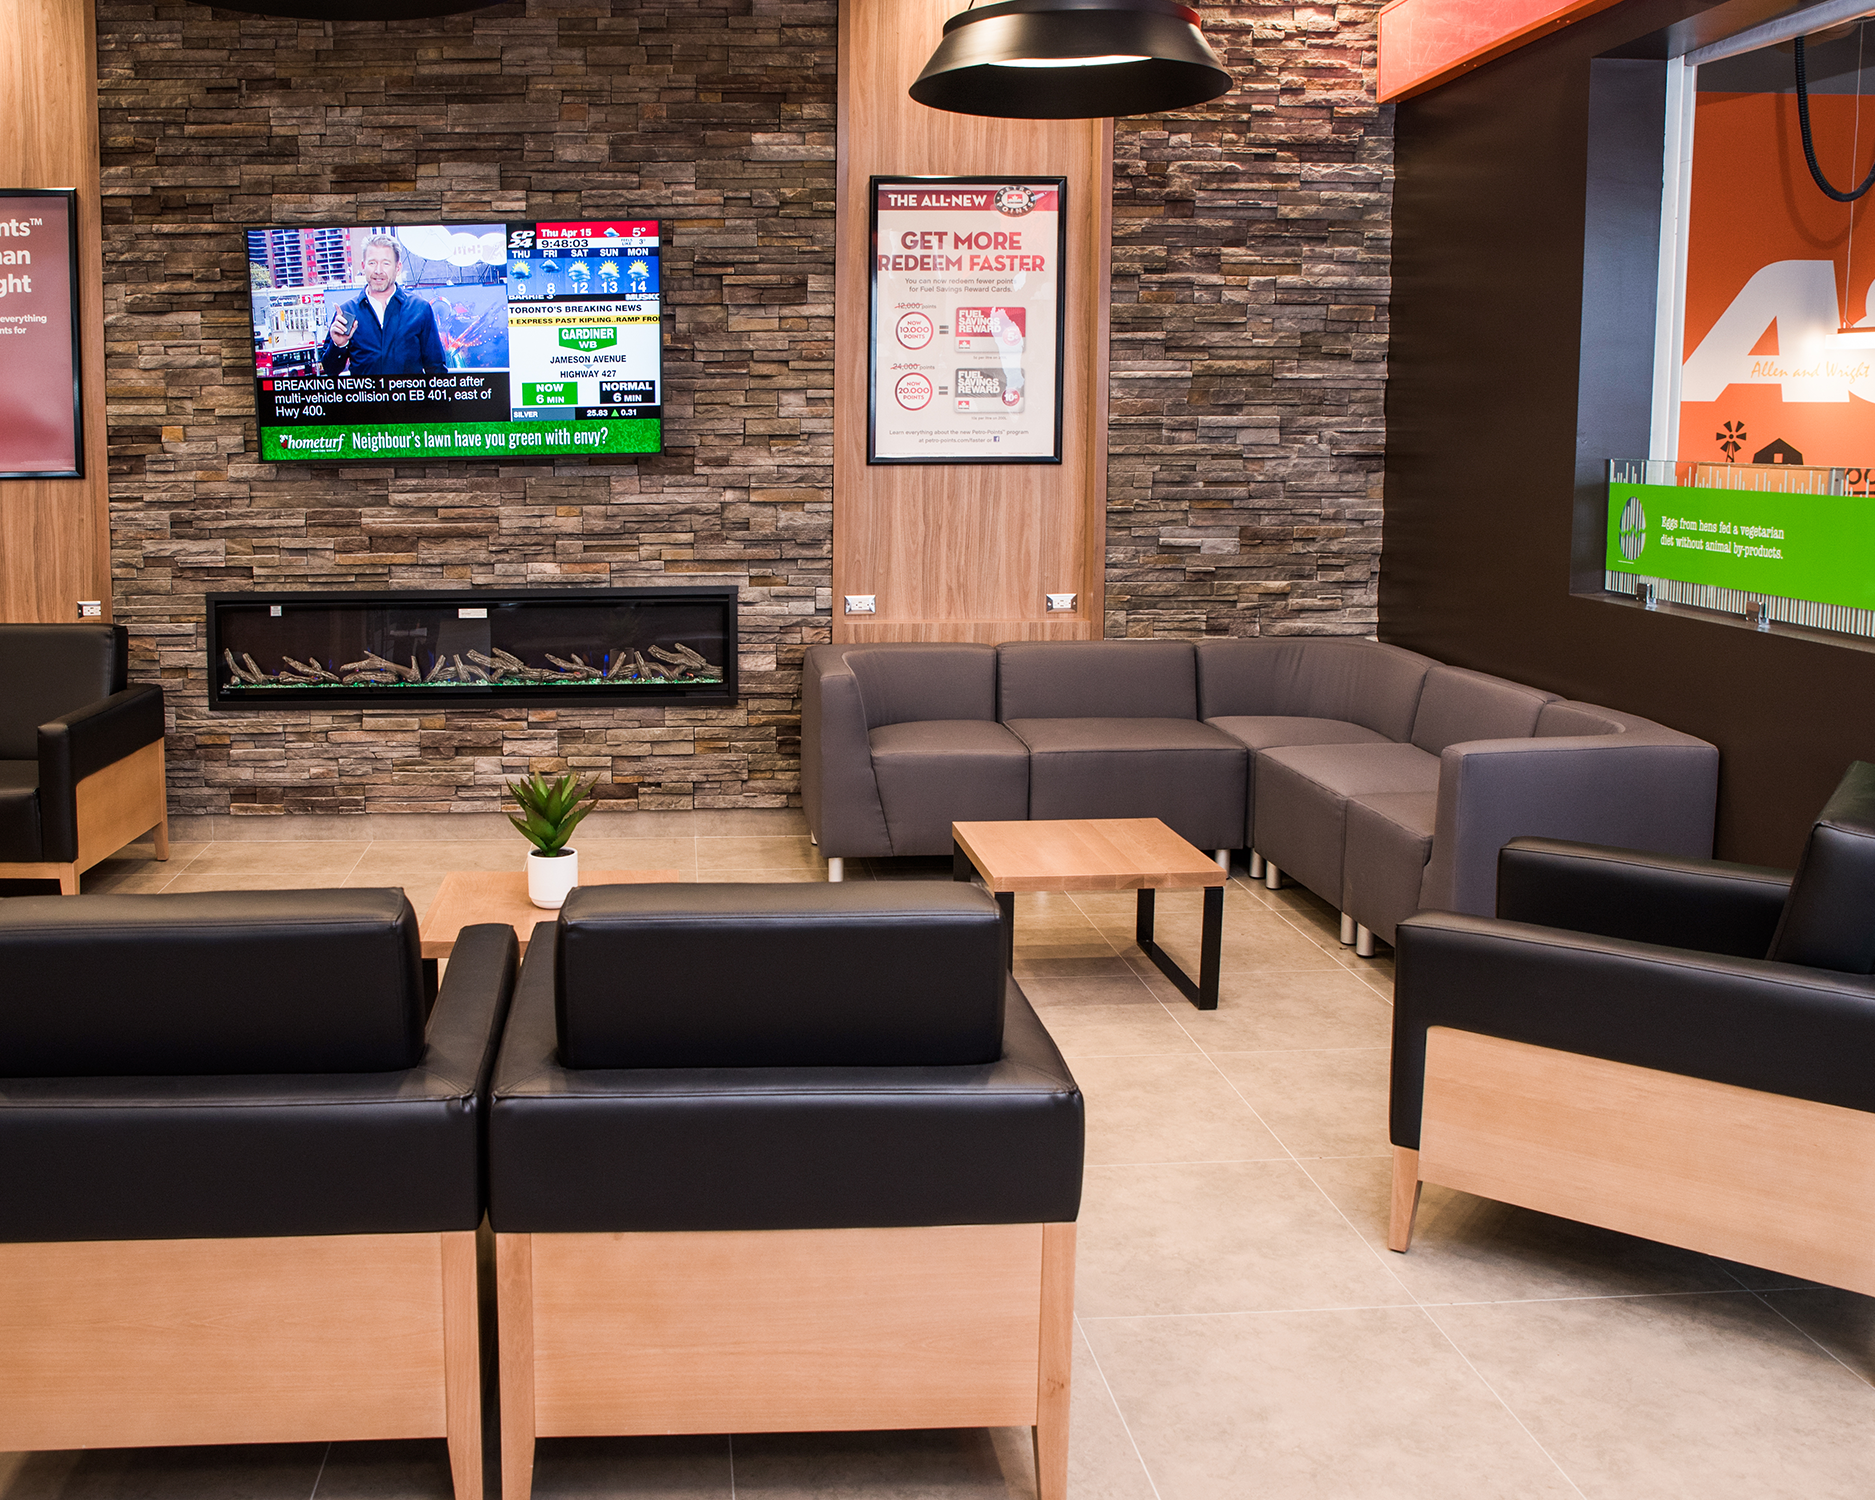 Petro Canada C-Store Design - Custom Furniture for Lounge Area, Couch and Coffee Table